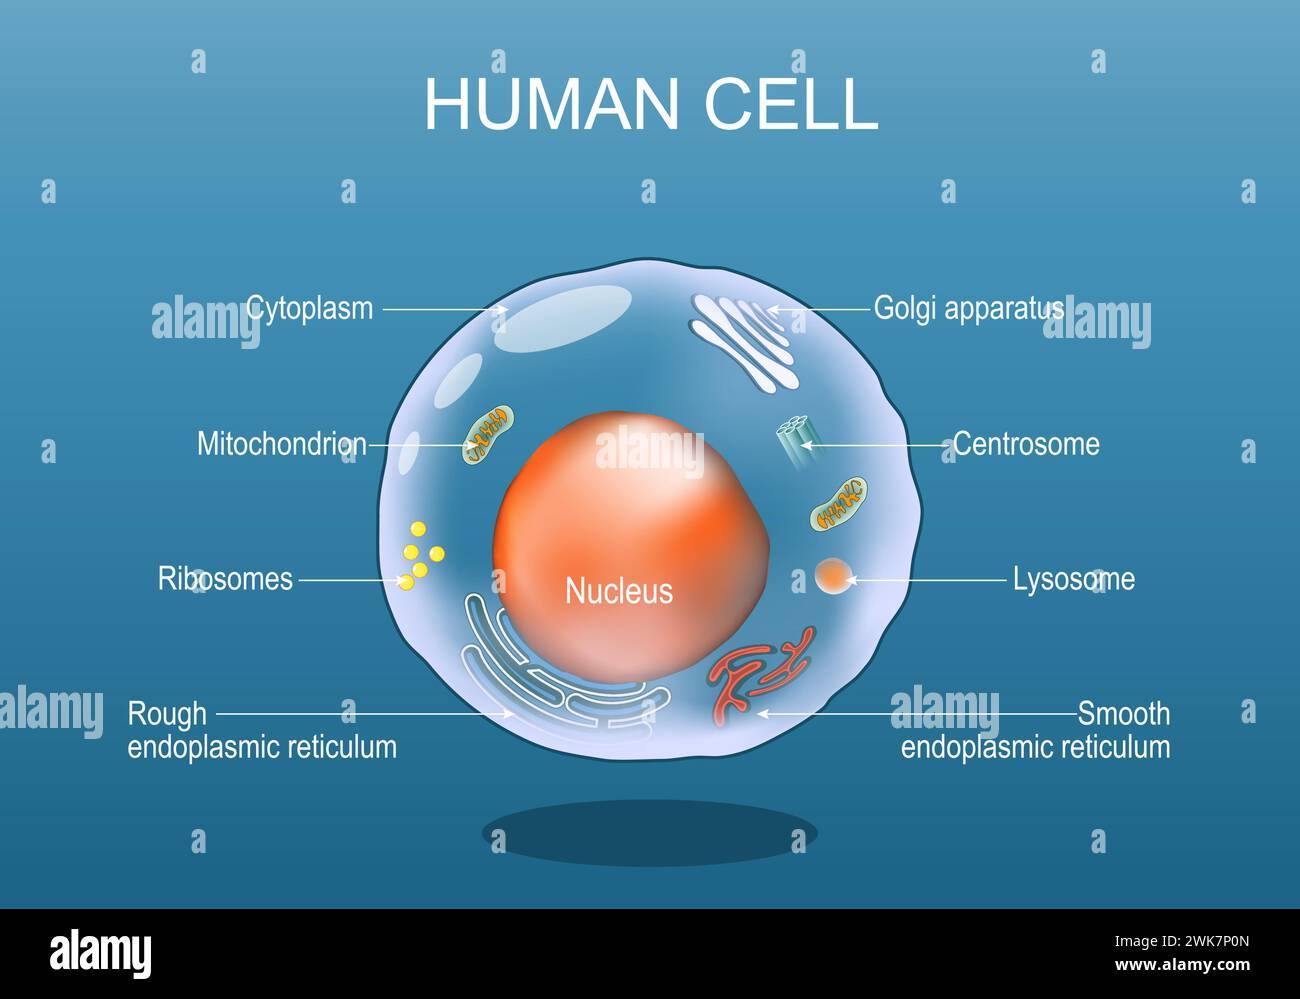 Human cell anatomy. Structure of a eukaryotic cell. All organelles: Nucleus, Ribosome, Rough endoplasmic reticulum, Golgi apparatus, mitochondrion, cy Stock Vector